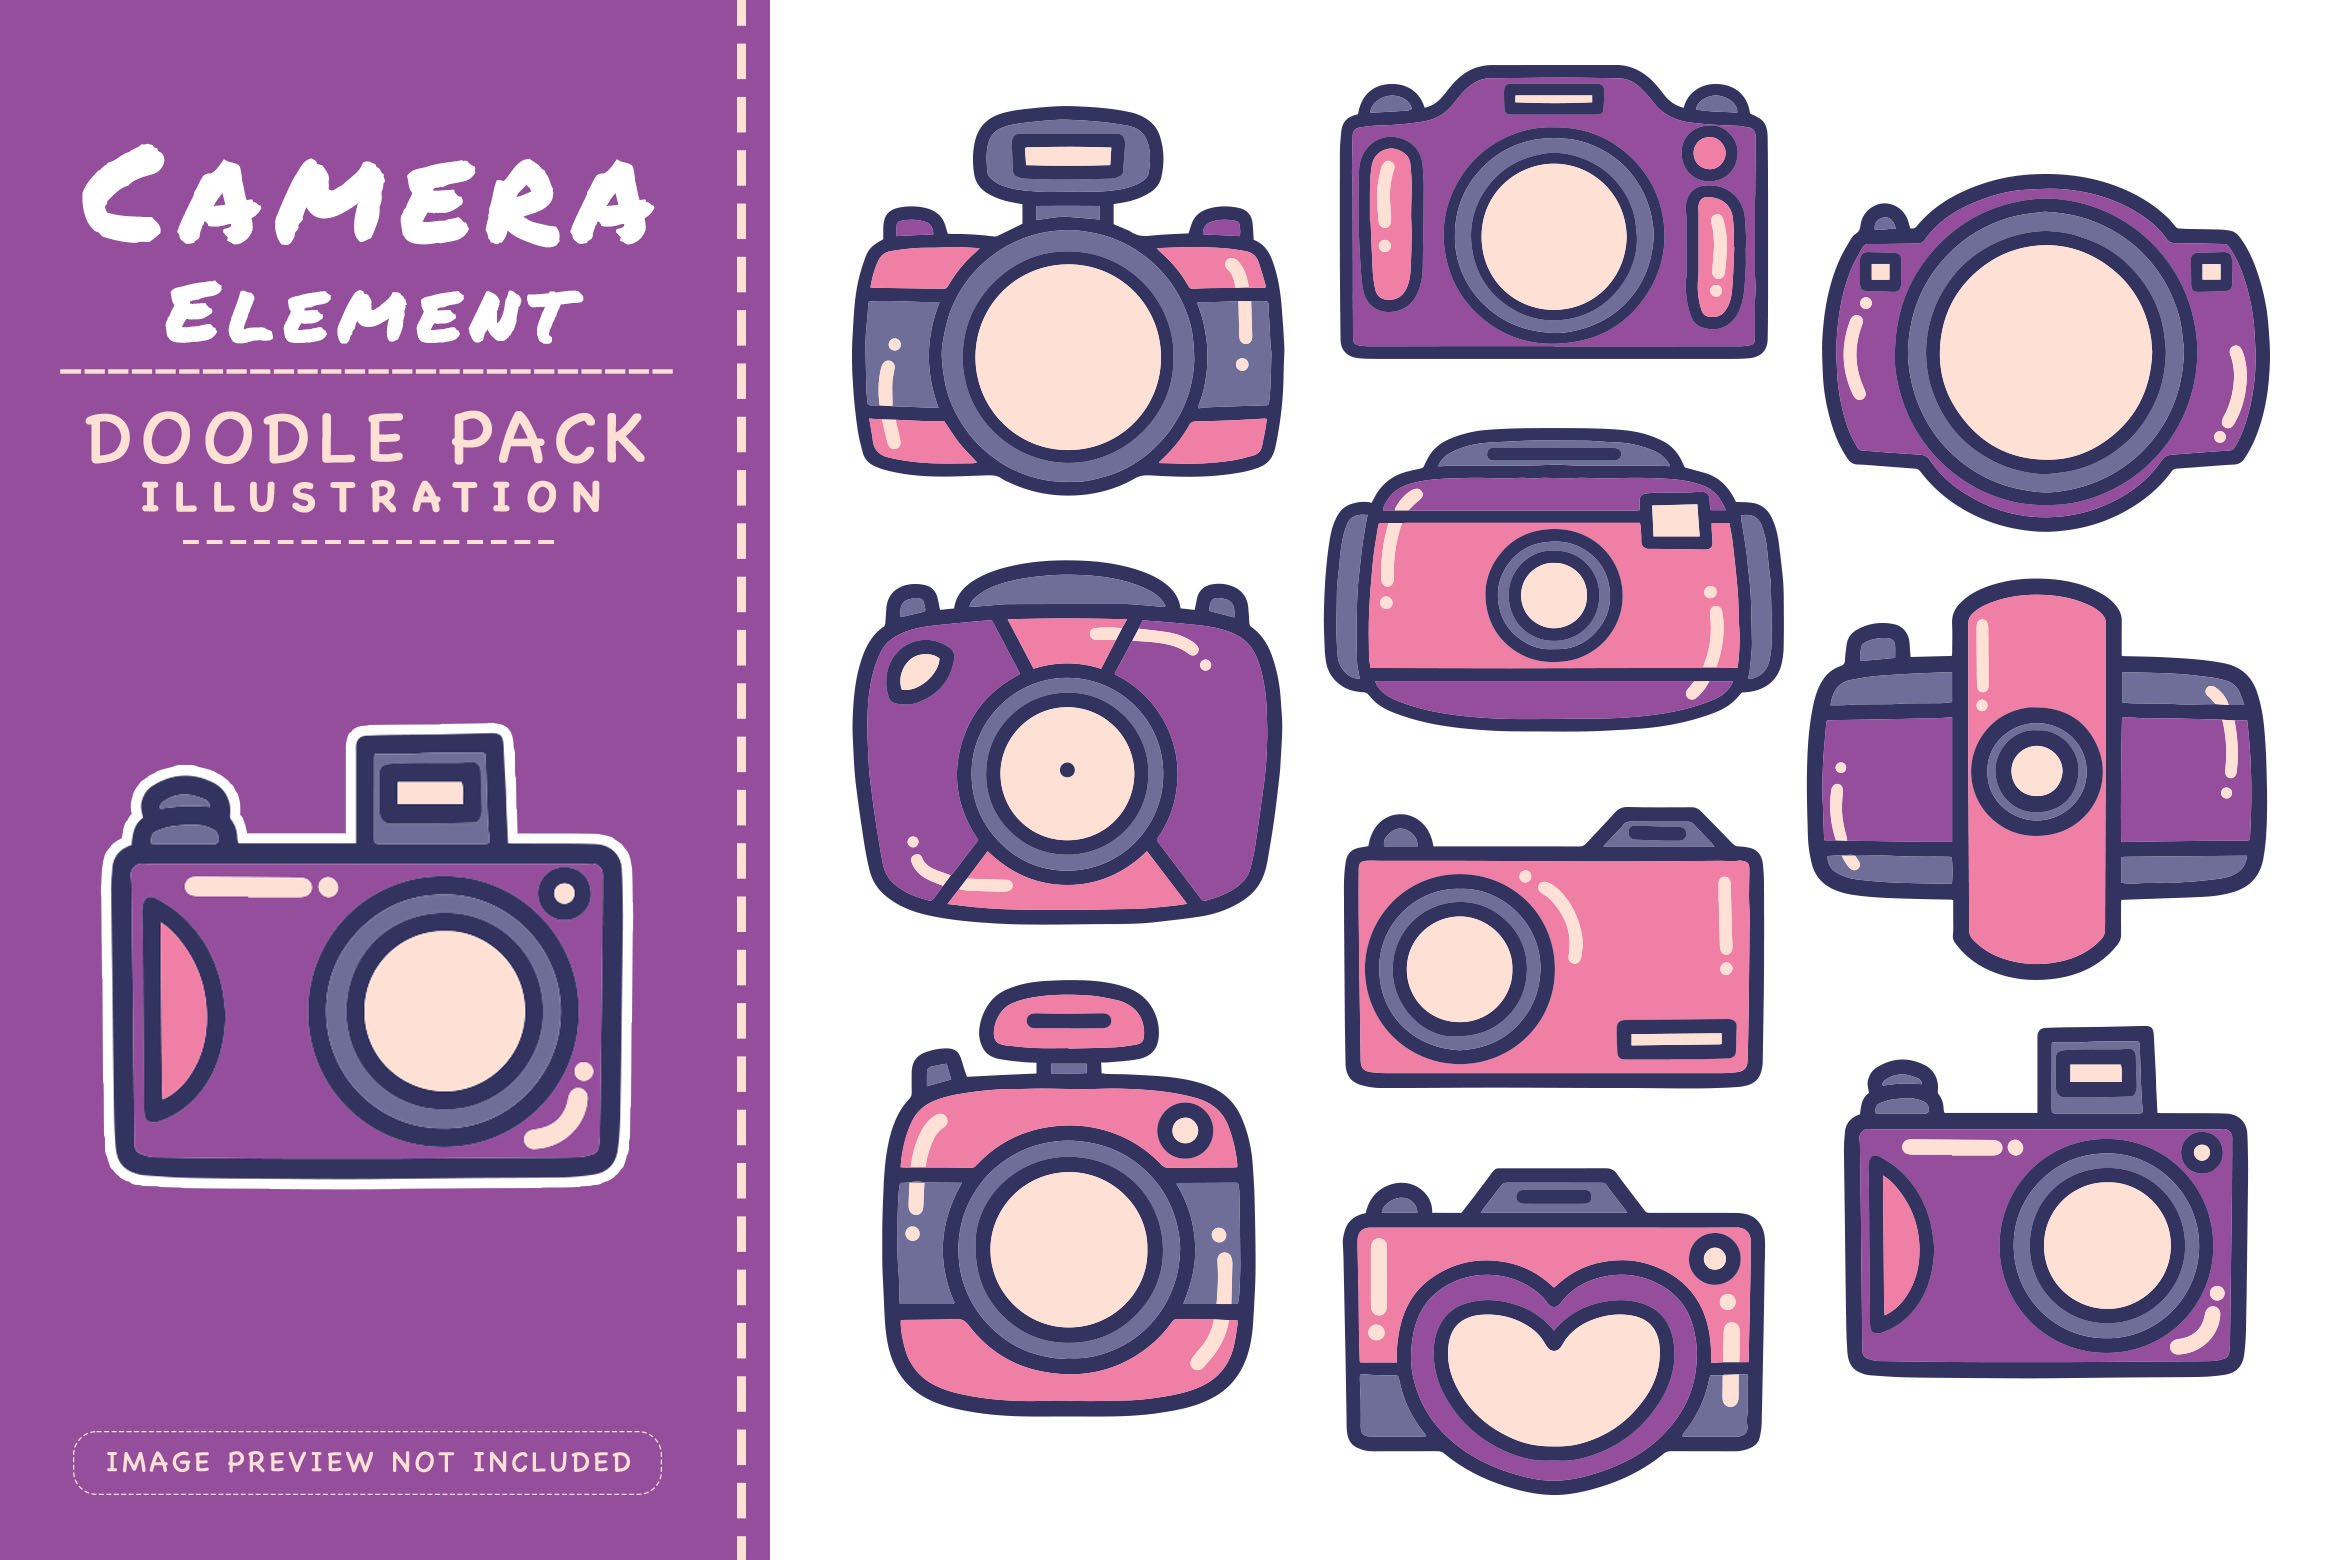 Camera Element - Doodle Pack cover image.